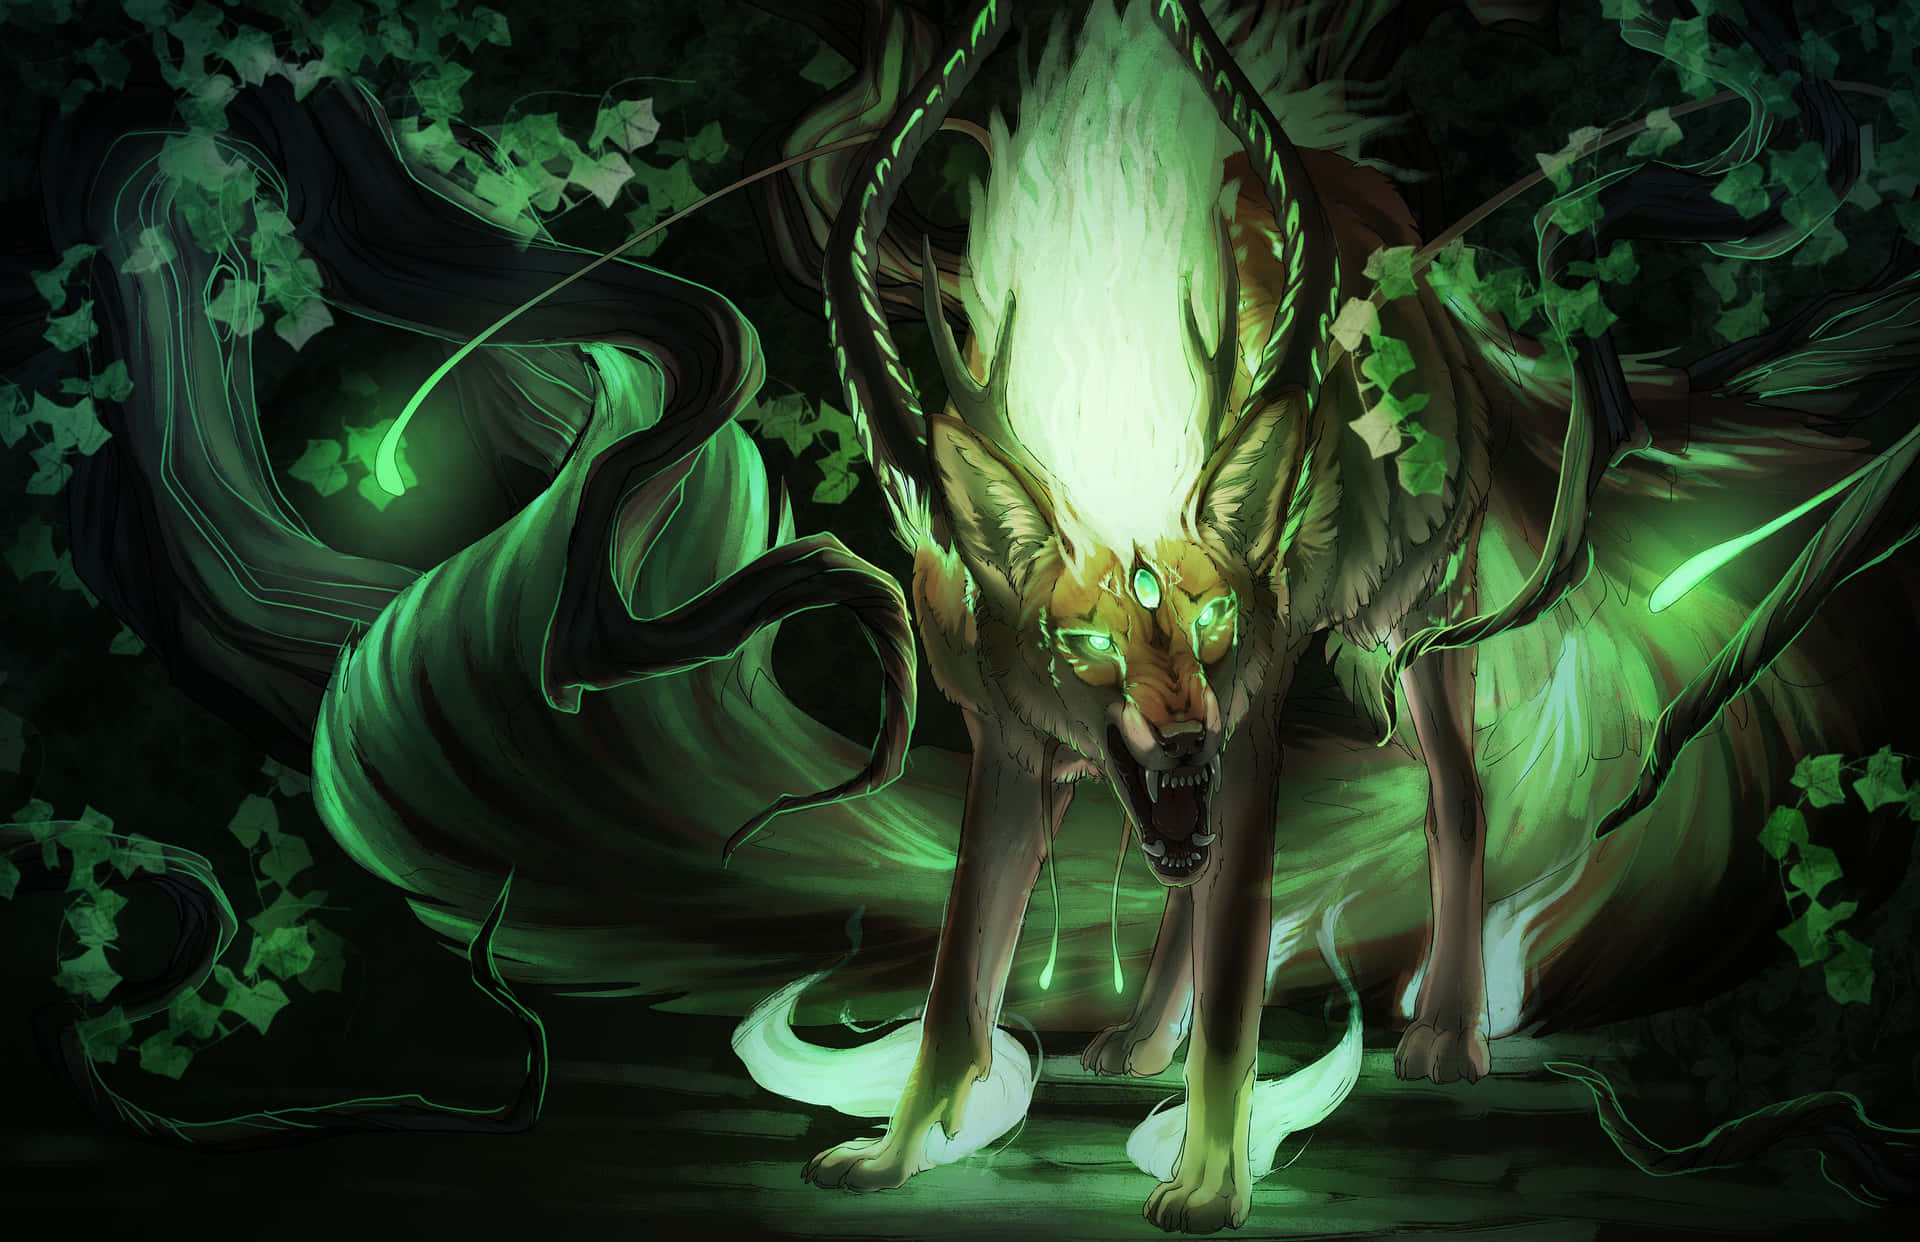 Mythological creatures come to life Wallpaper